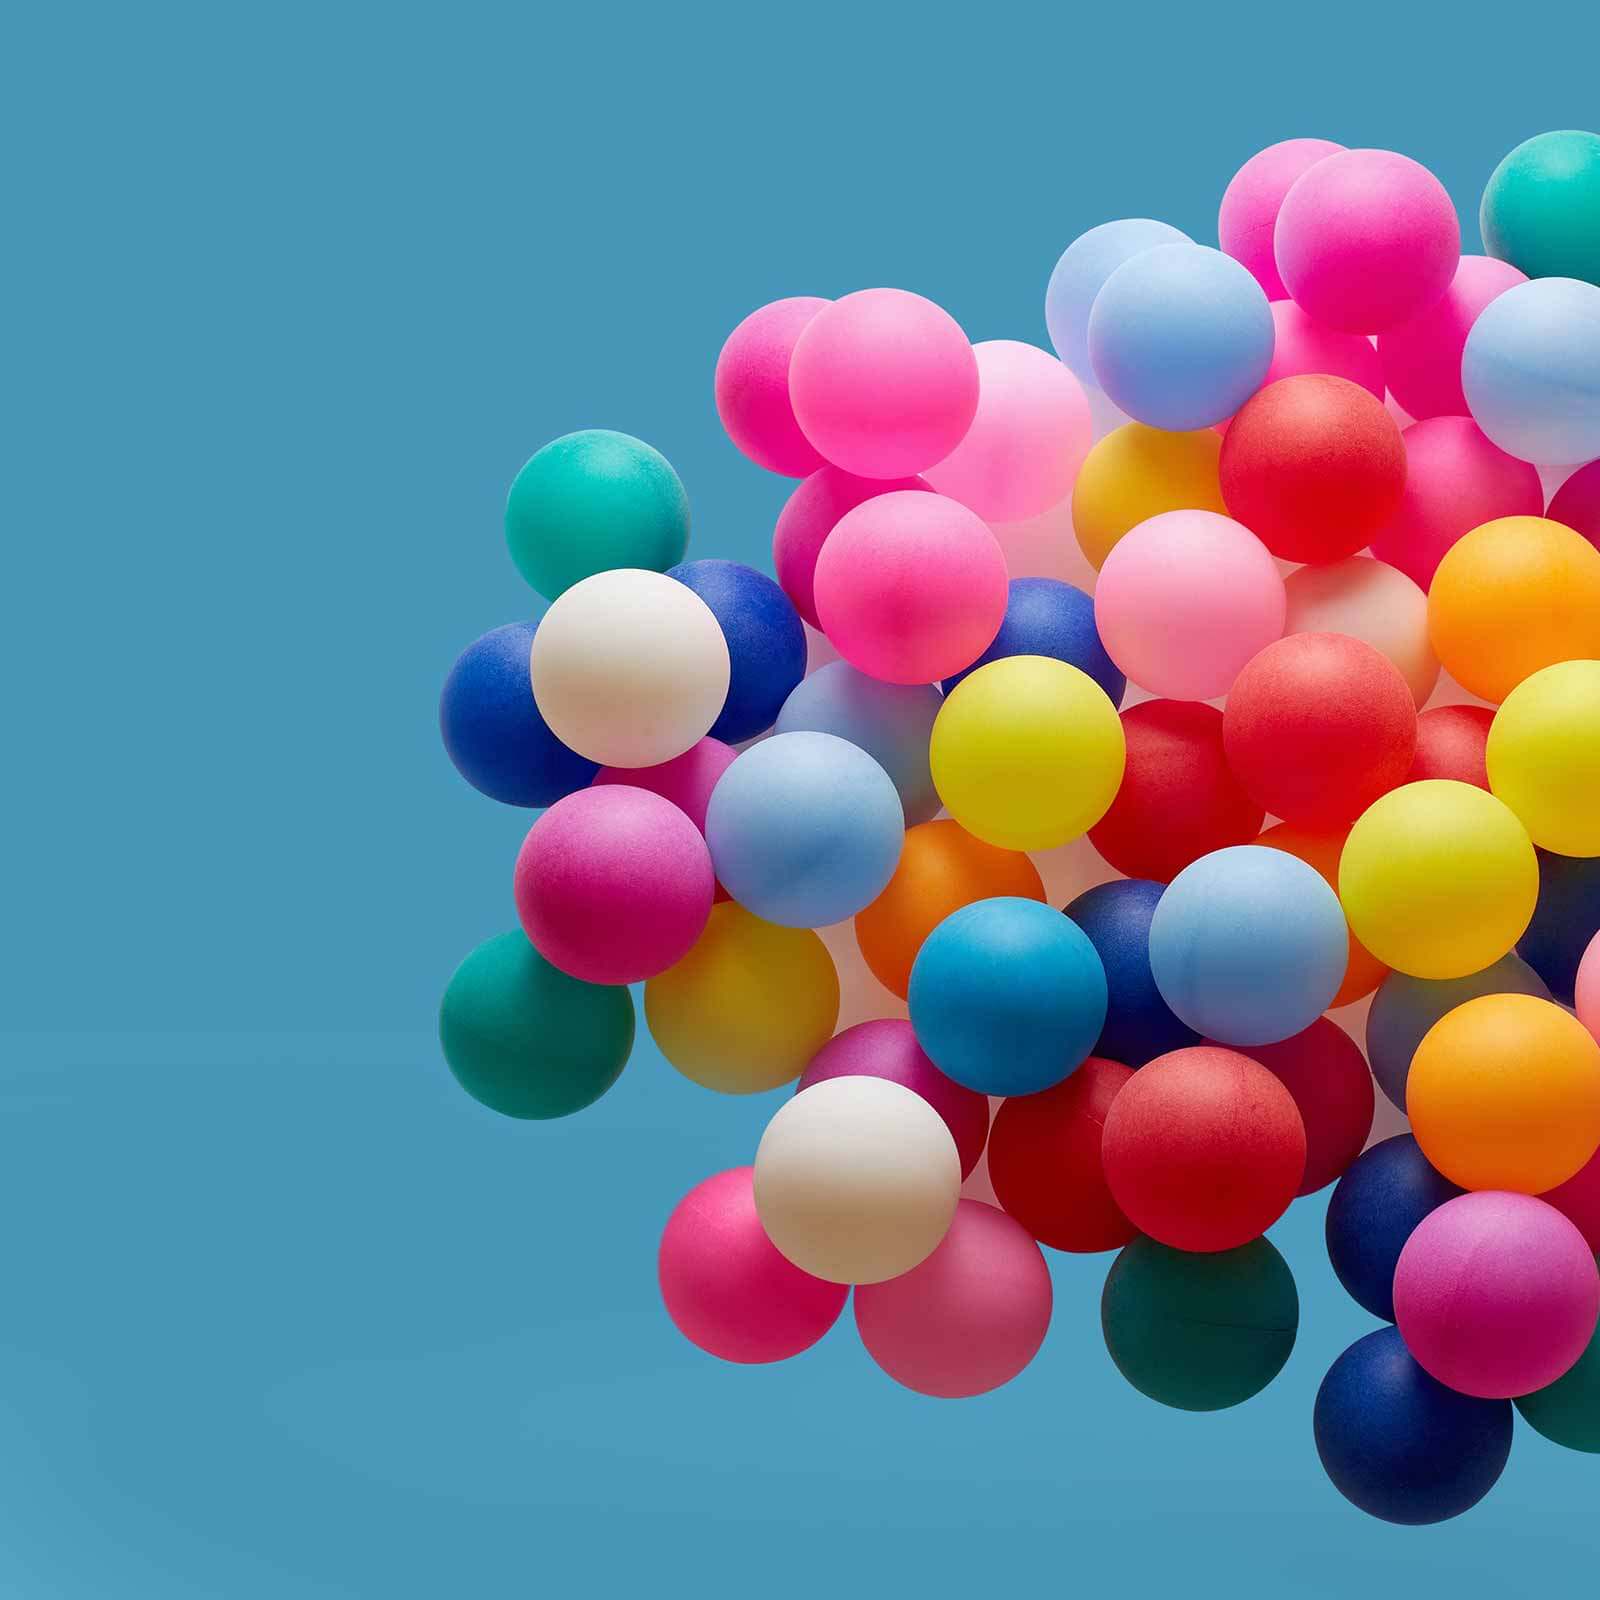 Colourful balloons on a blue backgroud